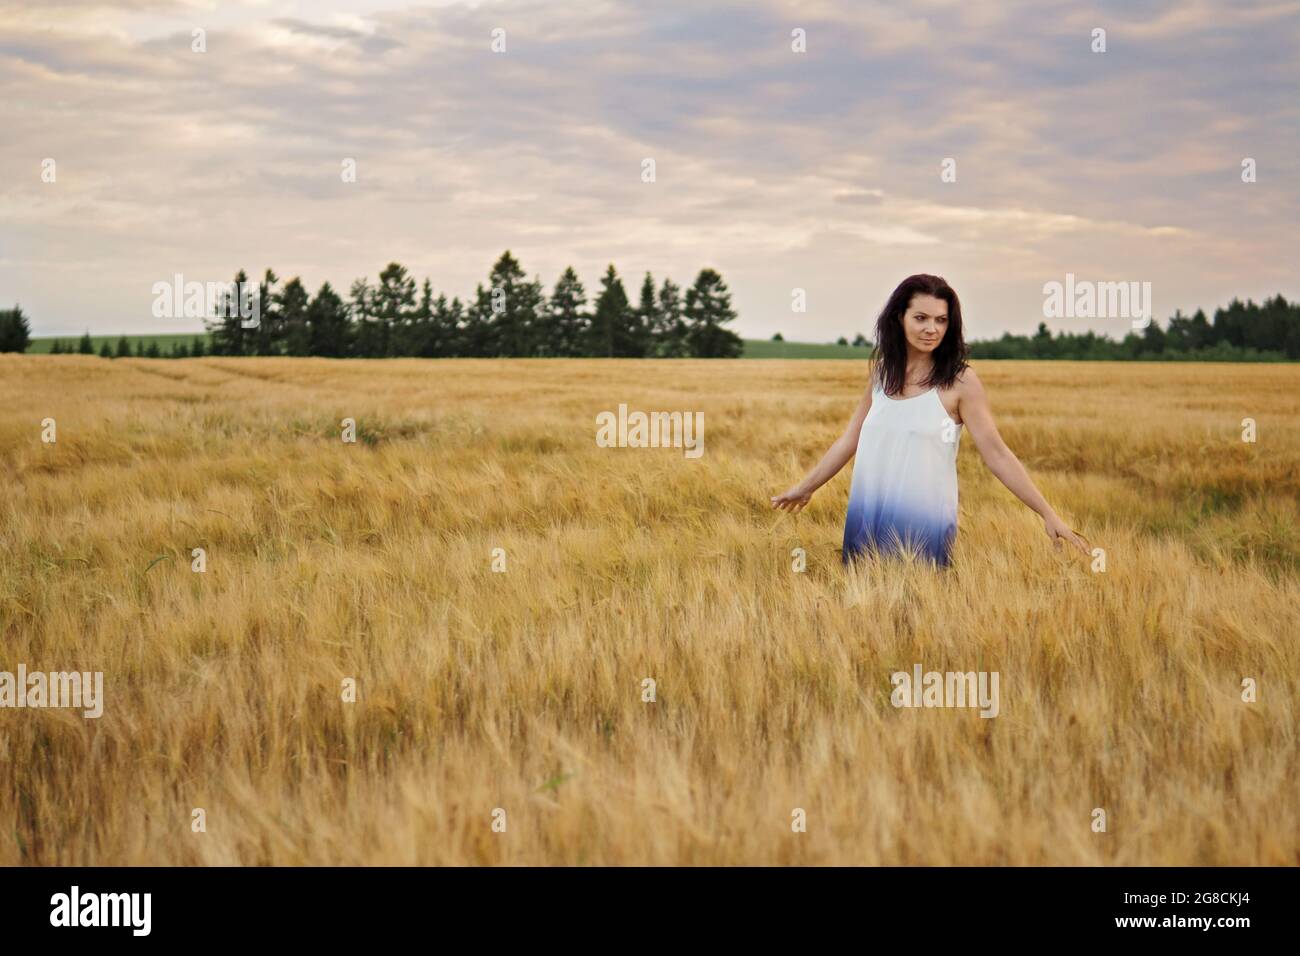 Portrait of young pretty woman without bra in barley field Stock Photo